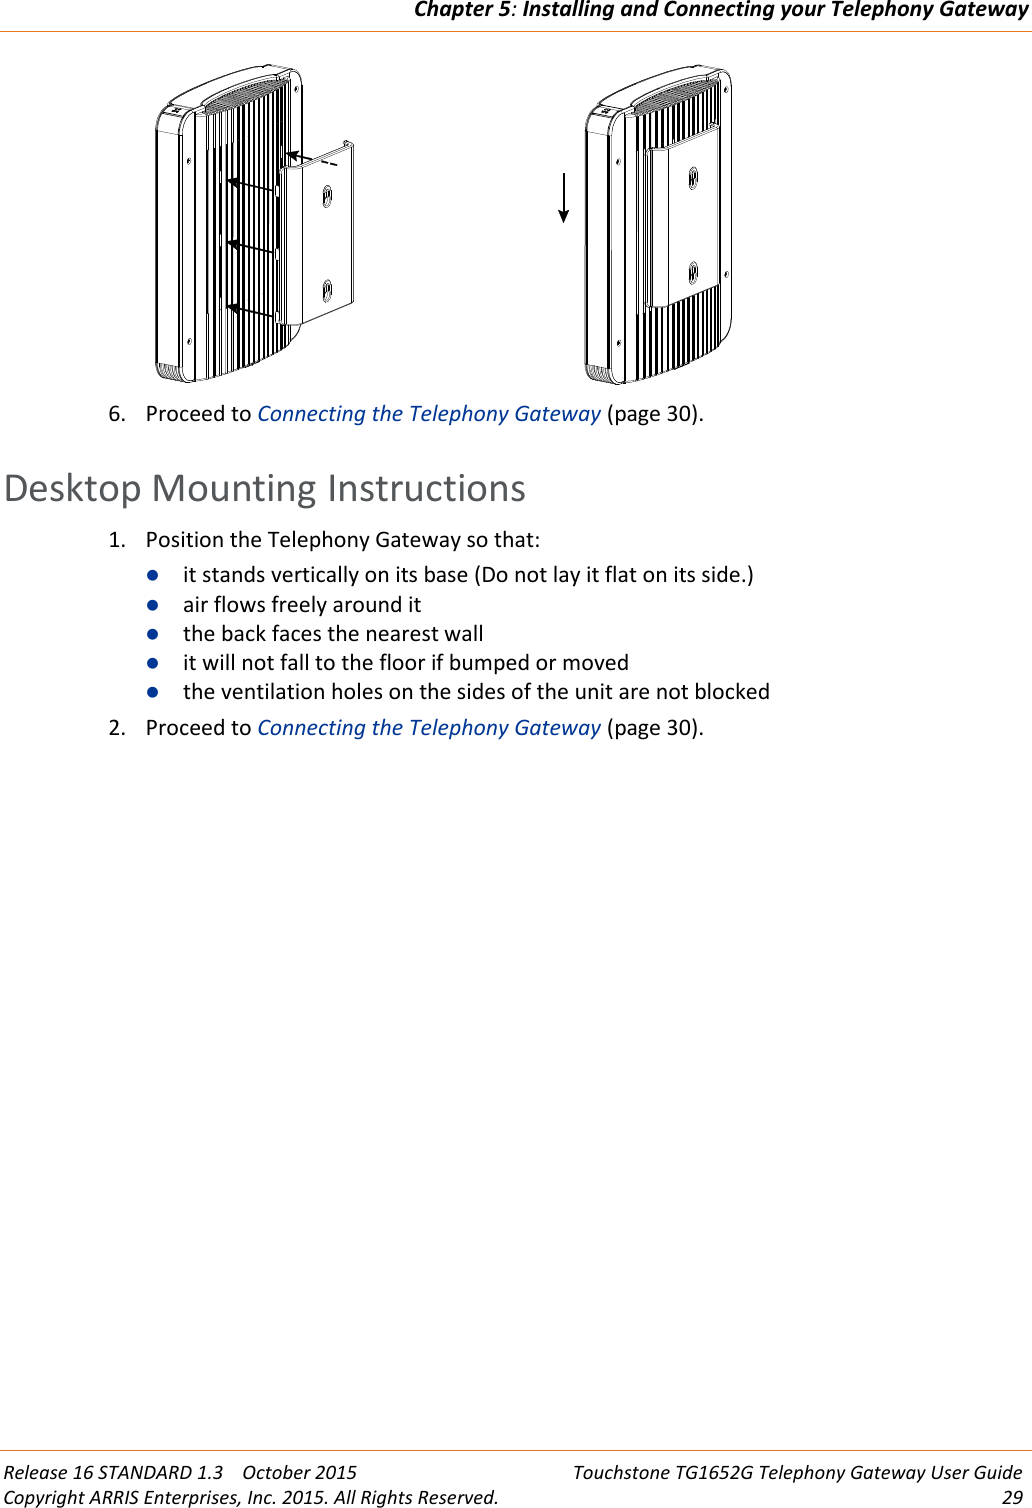 Chapter 5:Installing and Connecting your Telephony GatewayRelease 16 STANDARD 1.3 October 2015 Touchstone TG1652G Telephony Gateway User GuideCopyright ARRIS Enterprises, Inc. 2015. All Rights Reserved. 296. Proceed to Connecting the Telephony Gateway (page 30).Desktop Mounting Instructions1. Position the Telephony Gateway so that:it stands vertically on its base (Do not lay it flat on its side.)air flows freely around itthe back faces the nearest wallit will not fall to the floor if bumped or movedthe ventilation holes on the sides of the unit are not blocked2. Proceed to Connecting the Telephony Gateway (page 30).